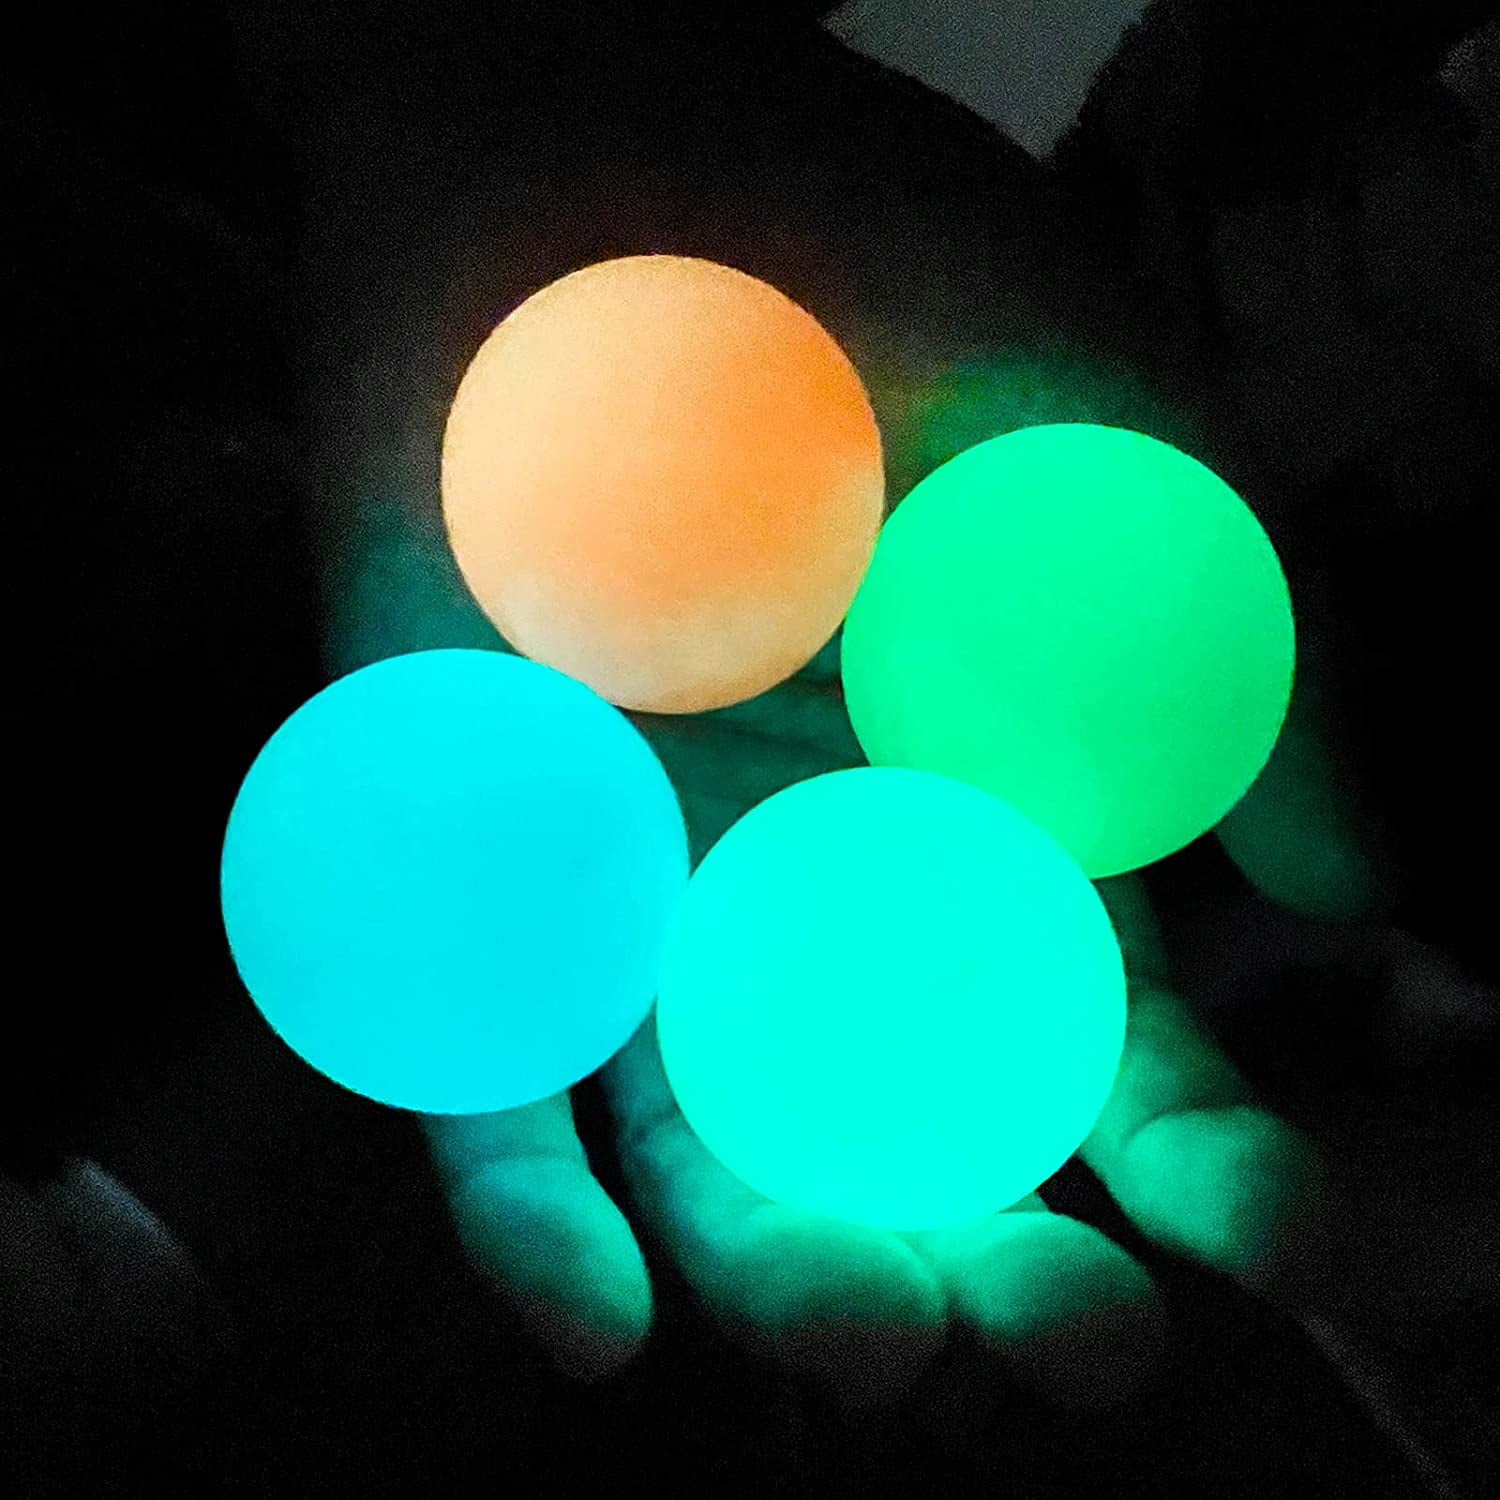 Squishy Glow Stress Relief Toys for Kids and Adults Tear-Resistant Non-Toxic Luminescent Stress Relief Balls Sticky Ball 4 Pcs Ceiling Sticky Wall Balls Glow in The Dark 